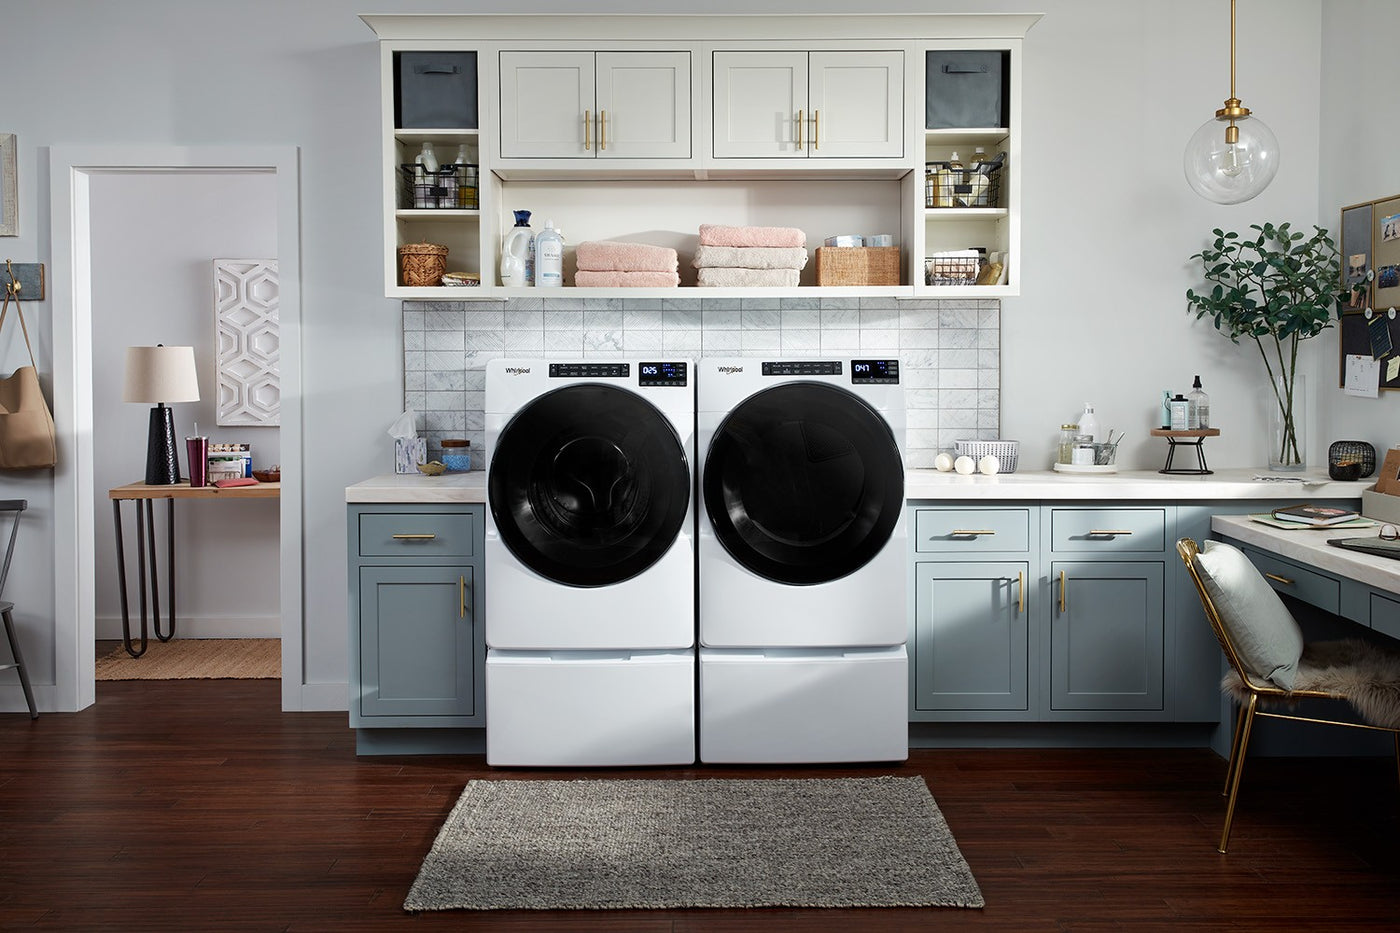 Whirlpool White Front-Load Washer (5.2 cu. ft.) & Gas Dryer (7.4 cu. ft.) - WFW5605MW/WGD6605MW